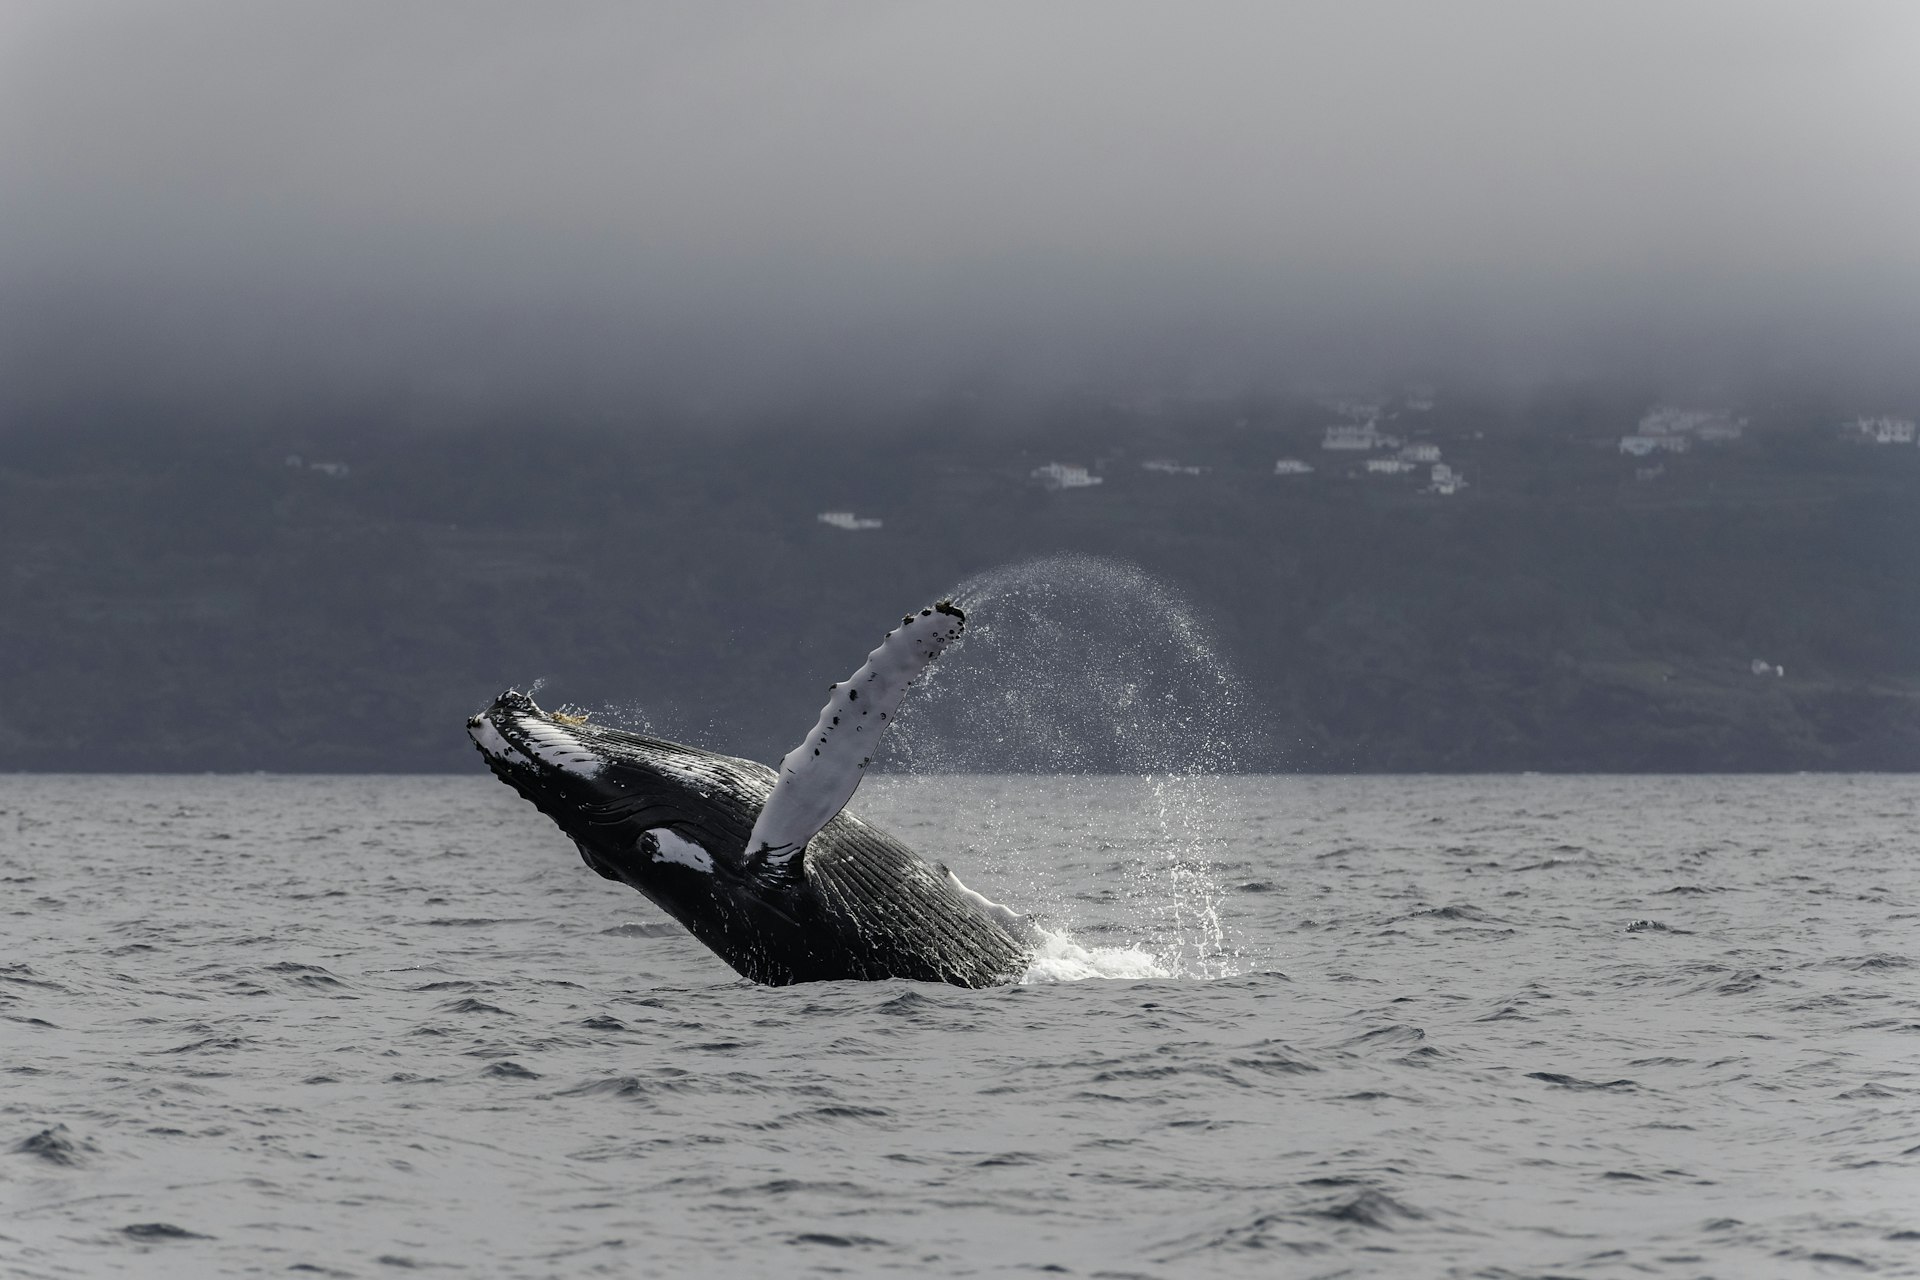 A humpback whale breaches the surface of the sea, with Pico island in the background 